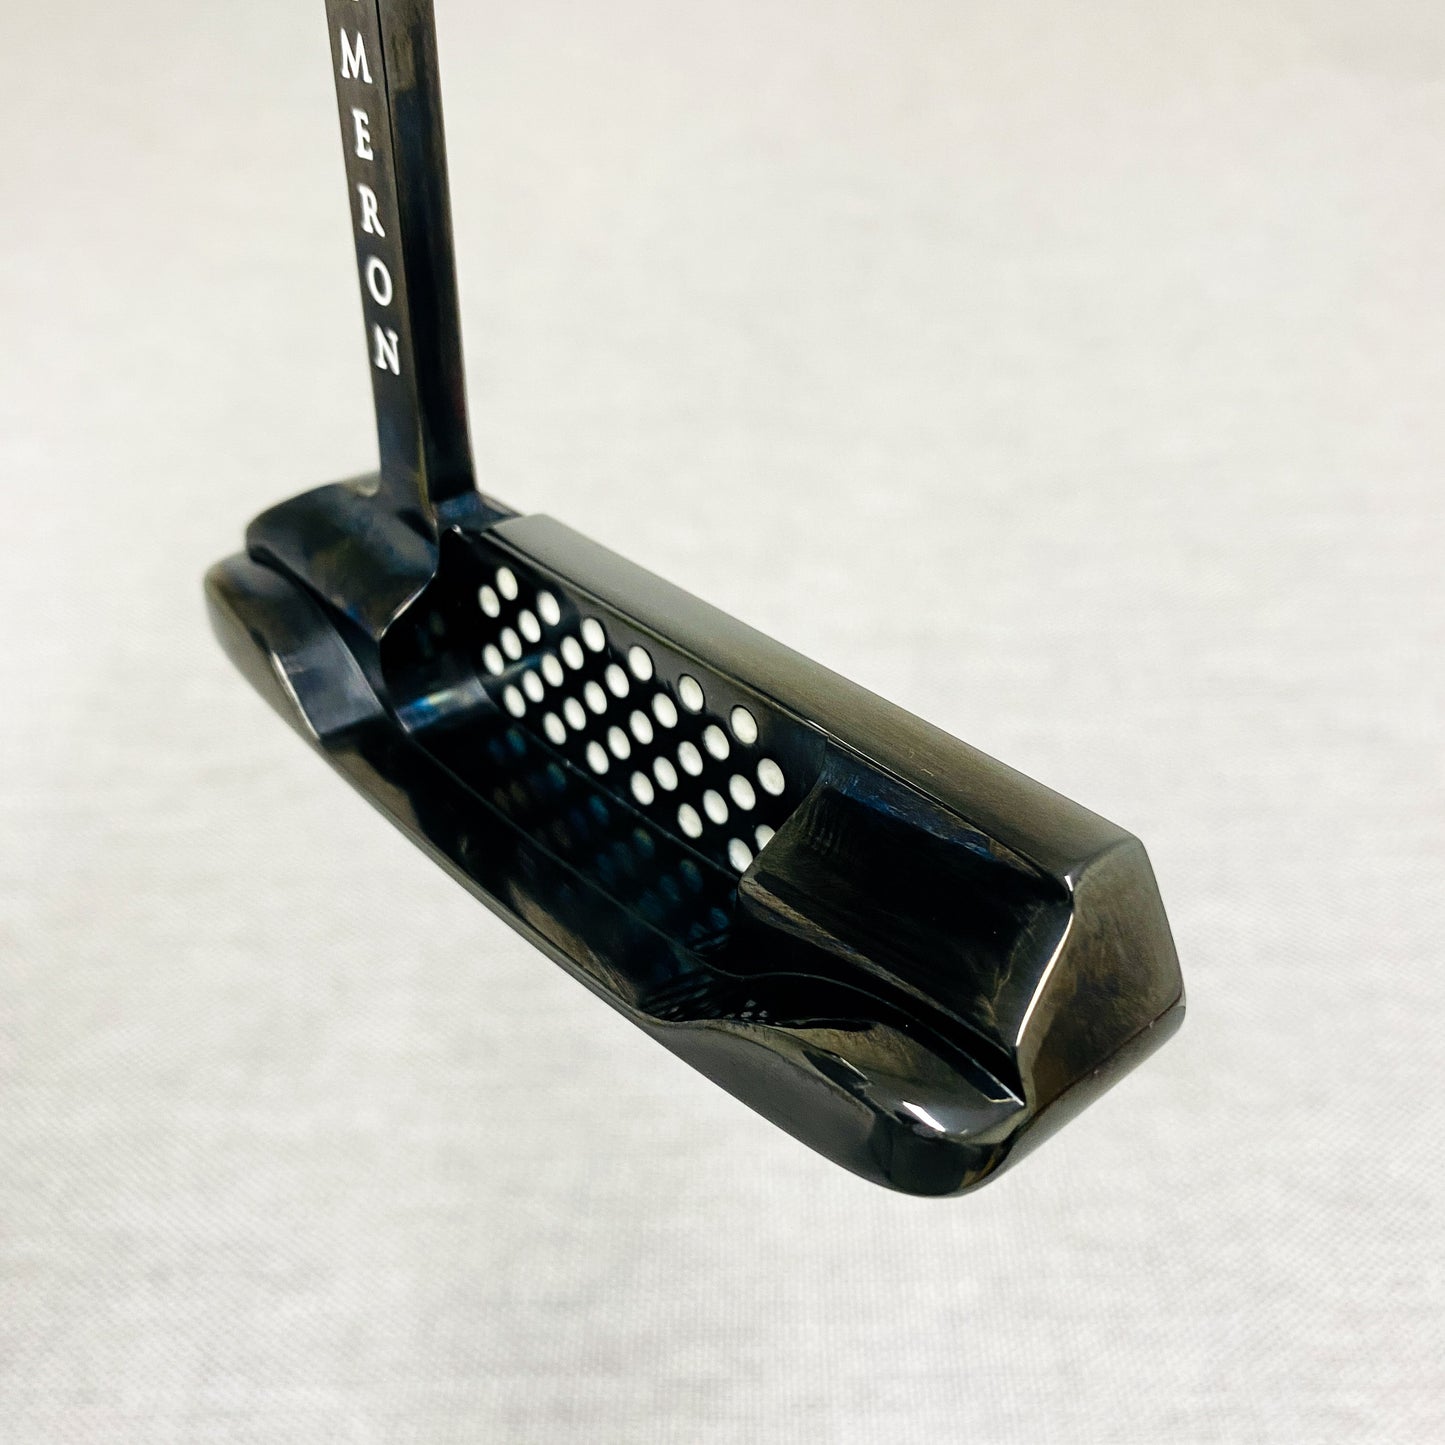 Scotty Cameron 2000 Tei3 Newport Long-Neck Putter. Refinished in factory black oxide. As New